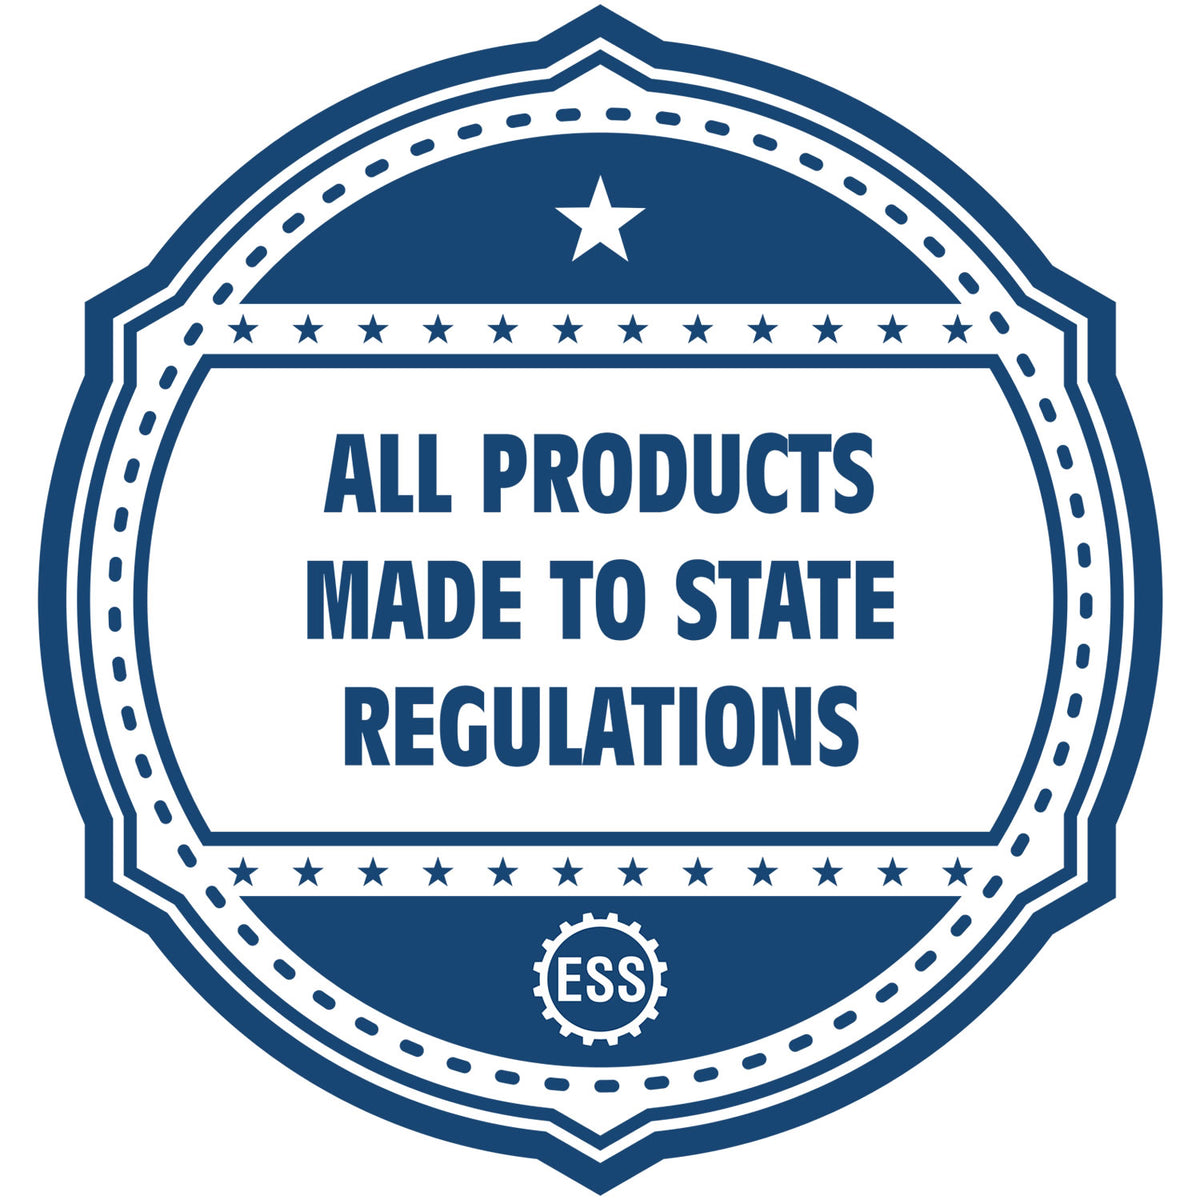 An icon or badge element for the Slim Pre-Inked South Carolina Land Surveyor Seal Stamp showing that this product is made in compliance with state regulations.